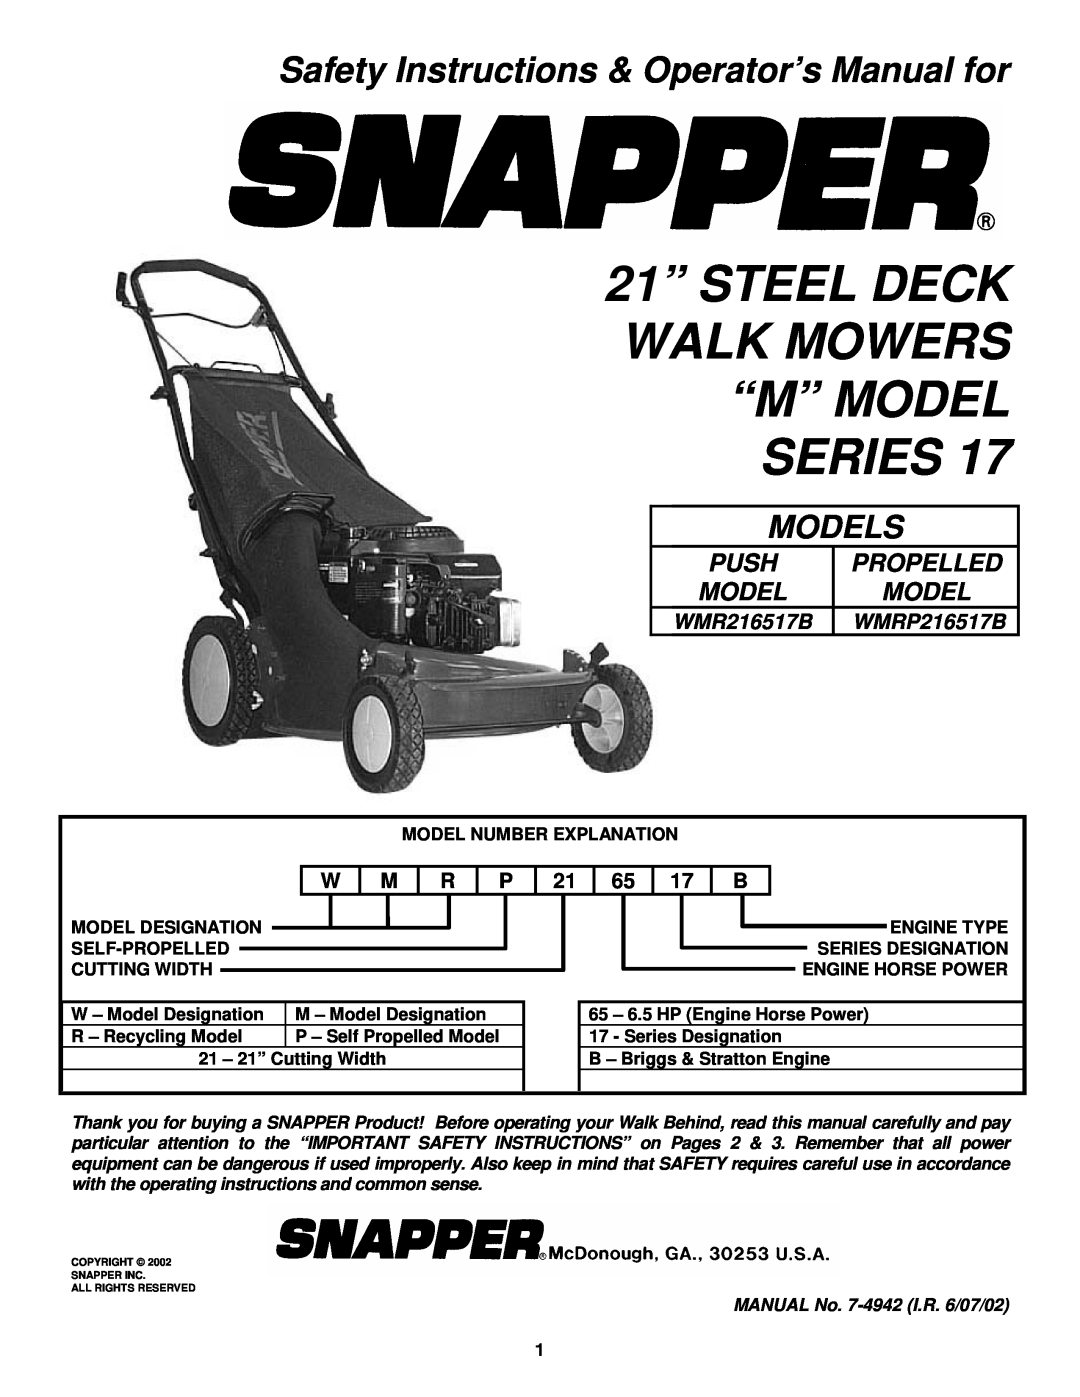 Snapper WMRP216517B important safety instructions 21” STEEL DECK WALK MOWERS “M” MODEL SERIES, Models, Push, Propelled 